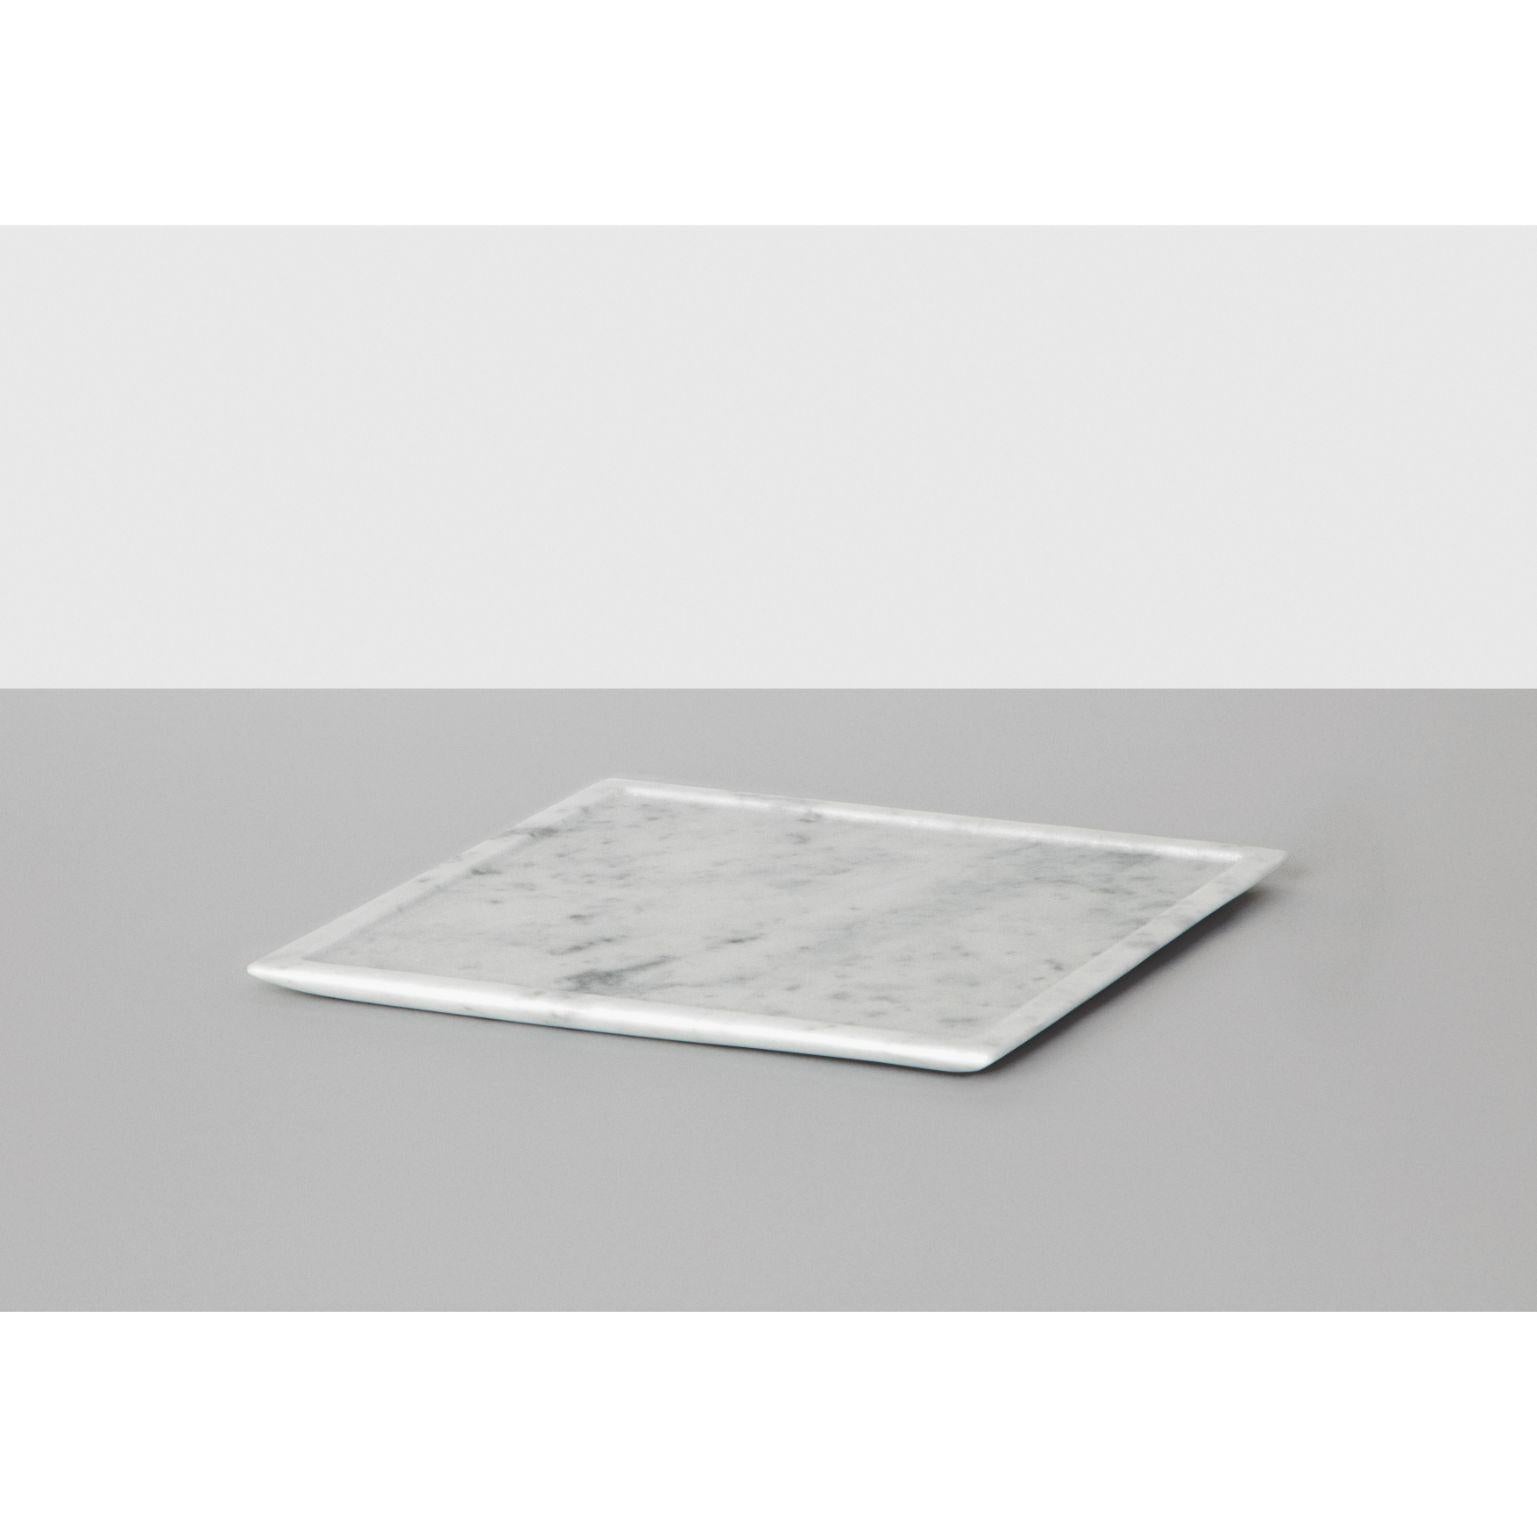 Square piano plate by Studioformart
Total marble collection
Dimensions: 22 x 22 x 18 cm
Materials: Bianco Carrara

The history of marble carving is lost in time; in one breath, it takes us back to the IV century BC, to ancient Greece where